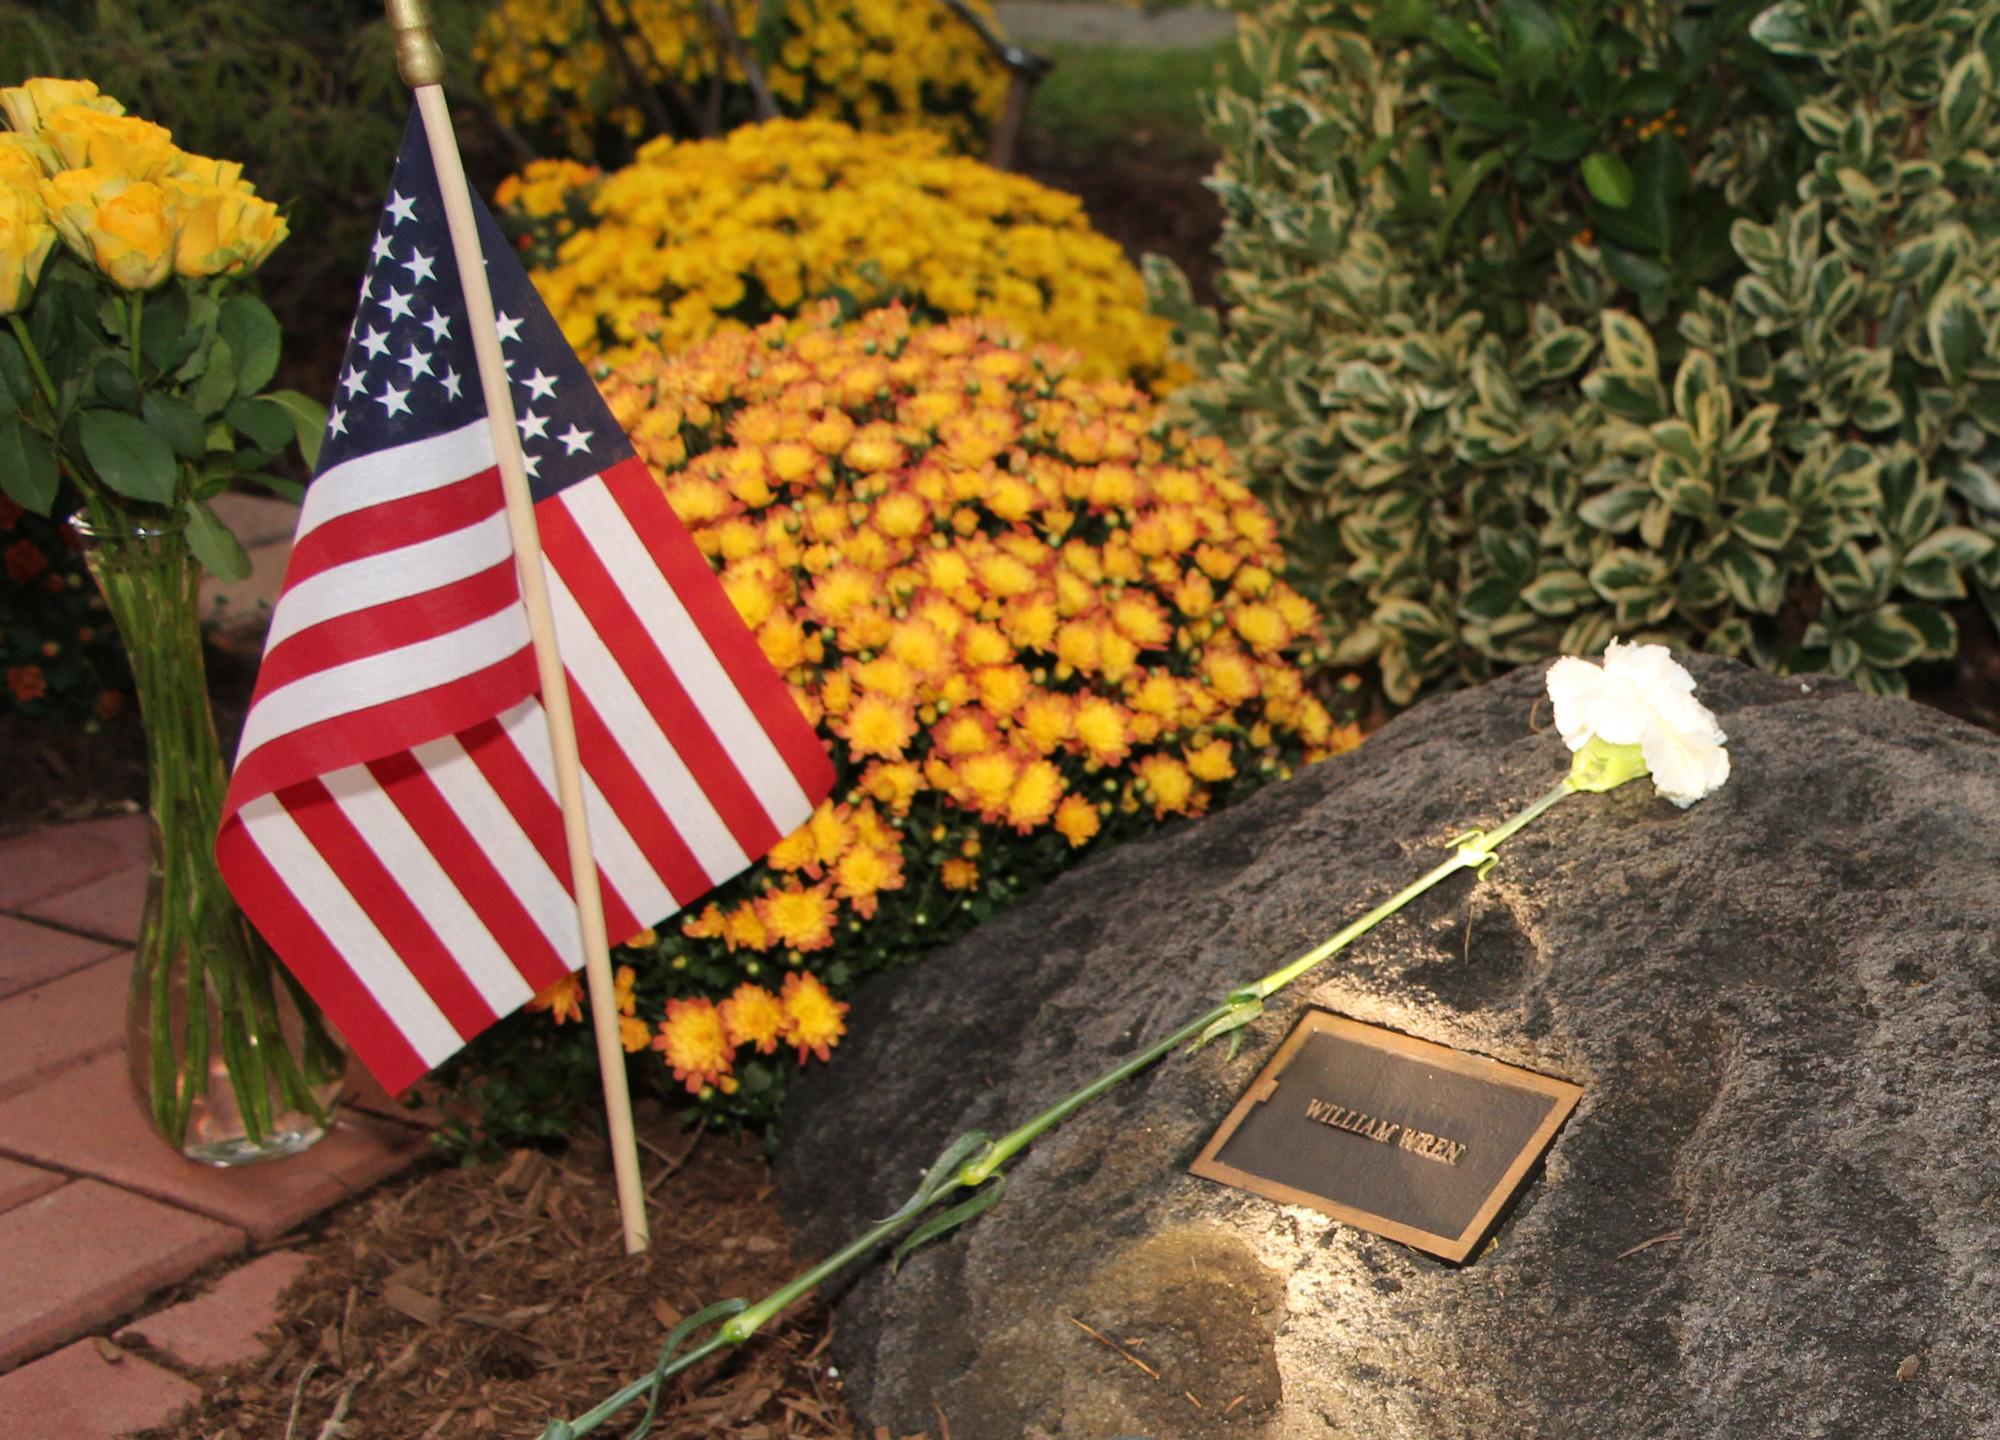 Flowers were laid down for the members in remembrance of  Lynbrook community members who were lost on 9/11.